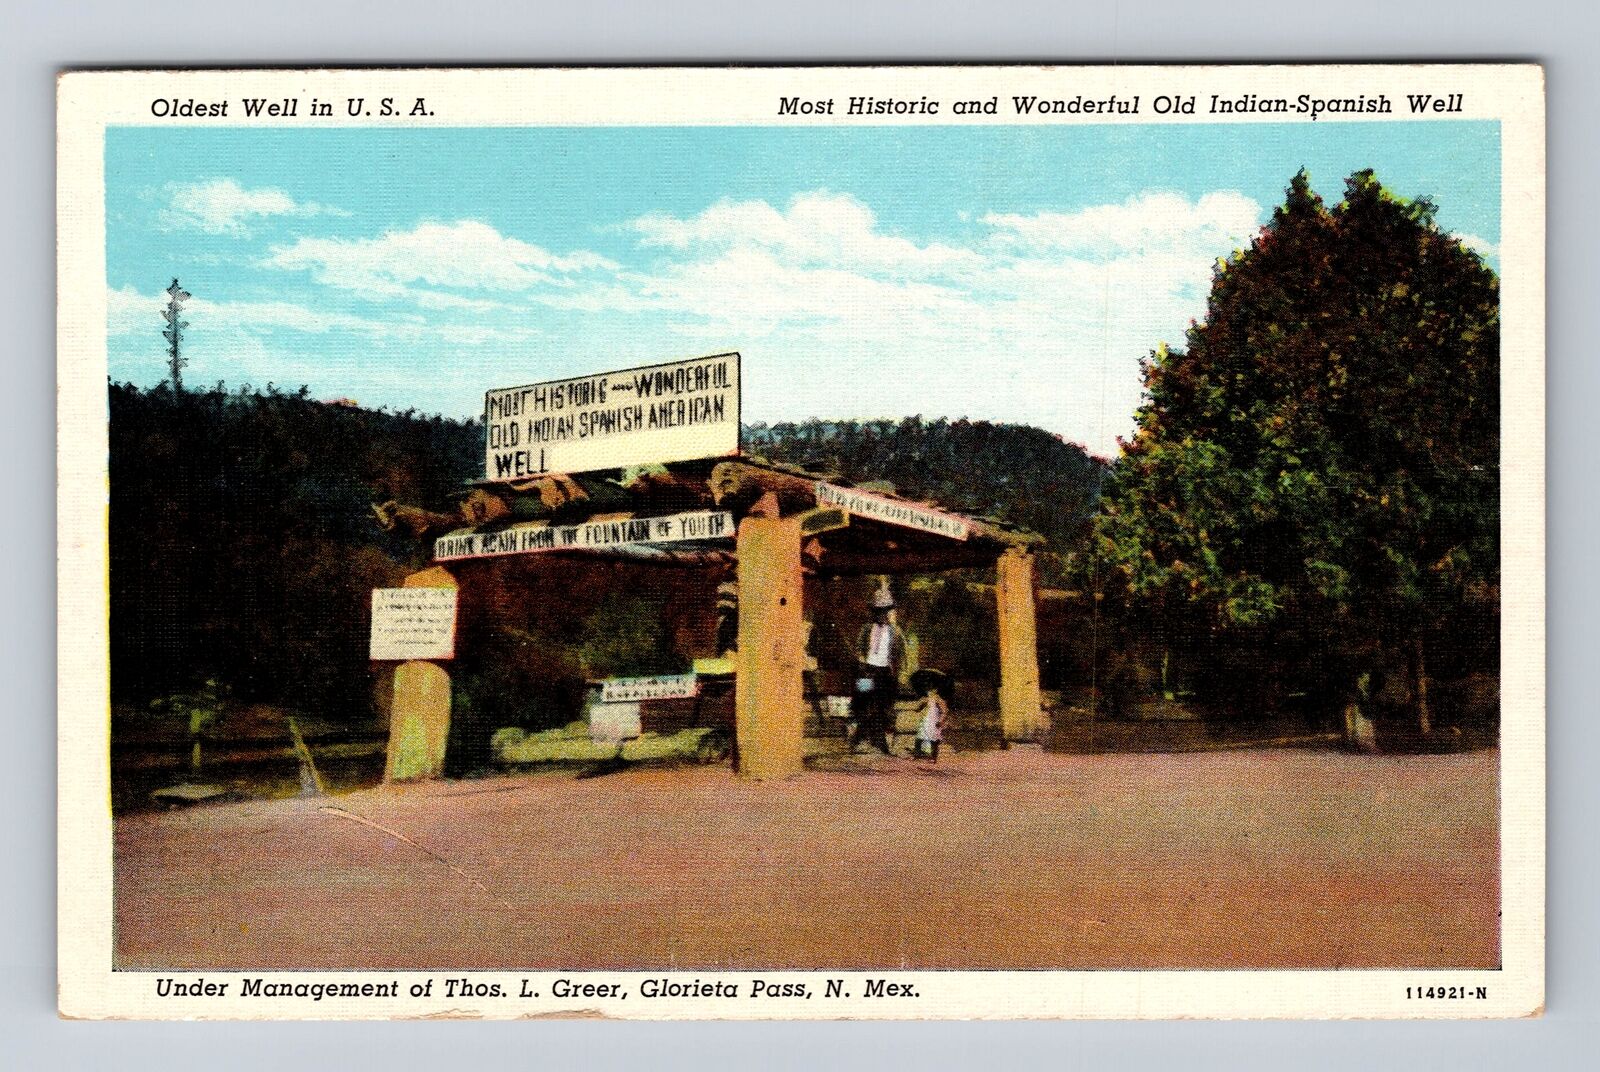 Glorieta Pass NM-New Mexico, Old Indian-Spanish Well Antique Vintage Postcard